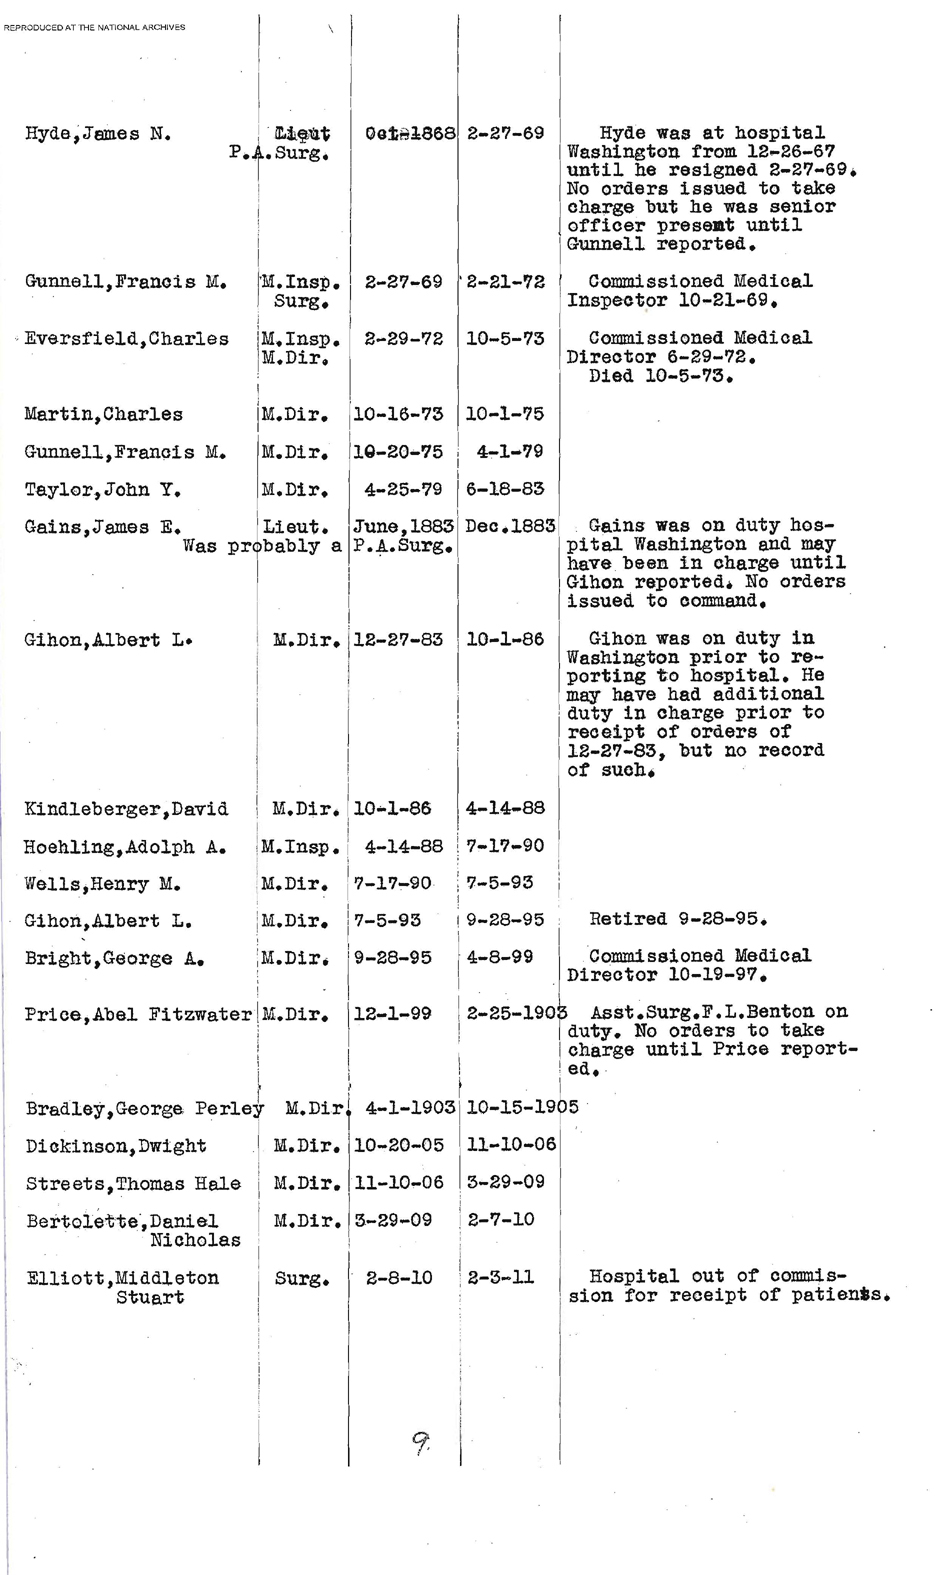 Roster of Commanding Officers of the Naval Hospital, Washington, DC, Page 9